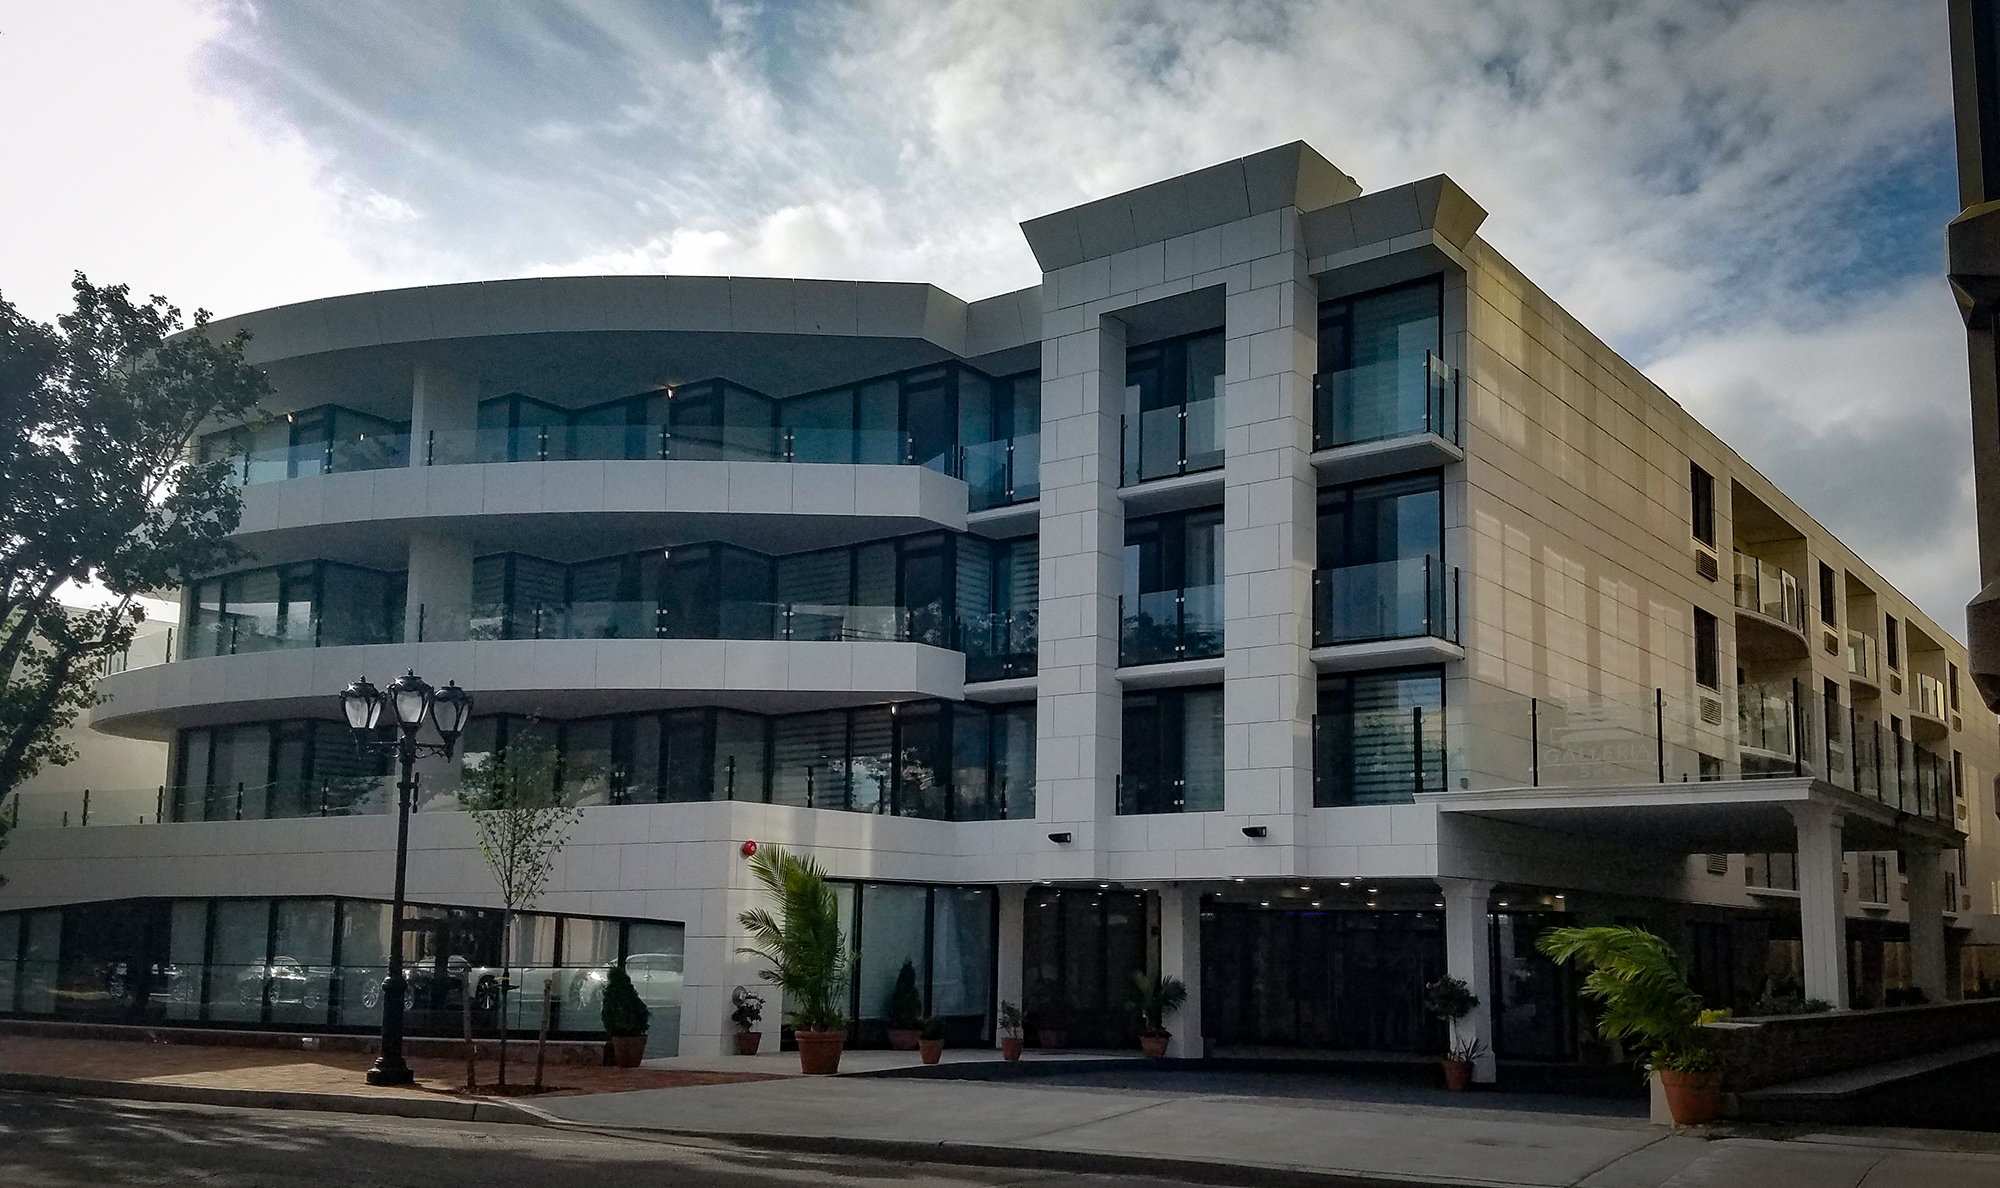 The Galleria, located along Grace Avenue, is home to 30 apartments and two new retail spaces. (Photo by Janelle Clausen)